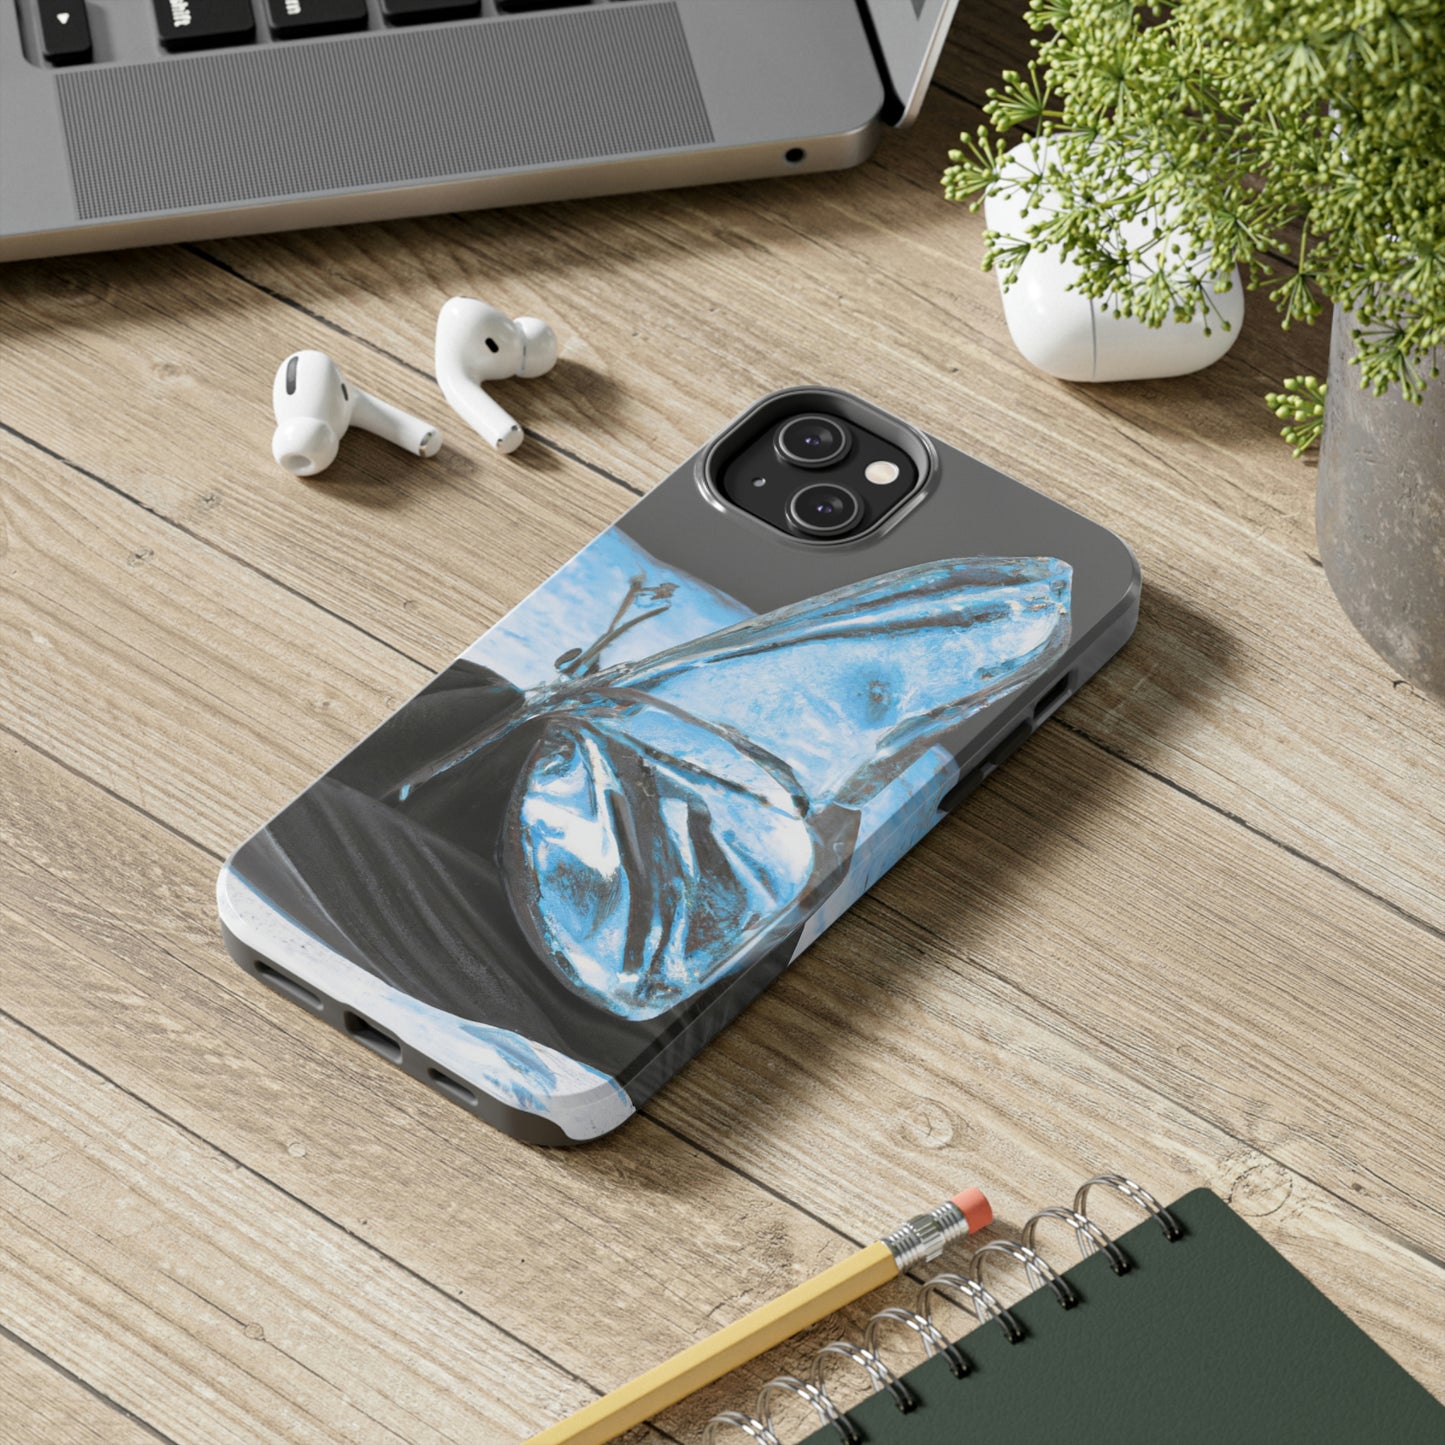 "Wishing for the Sky: A Crystal Butterfly's Dream" - The Alien Tough Phone Cases